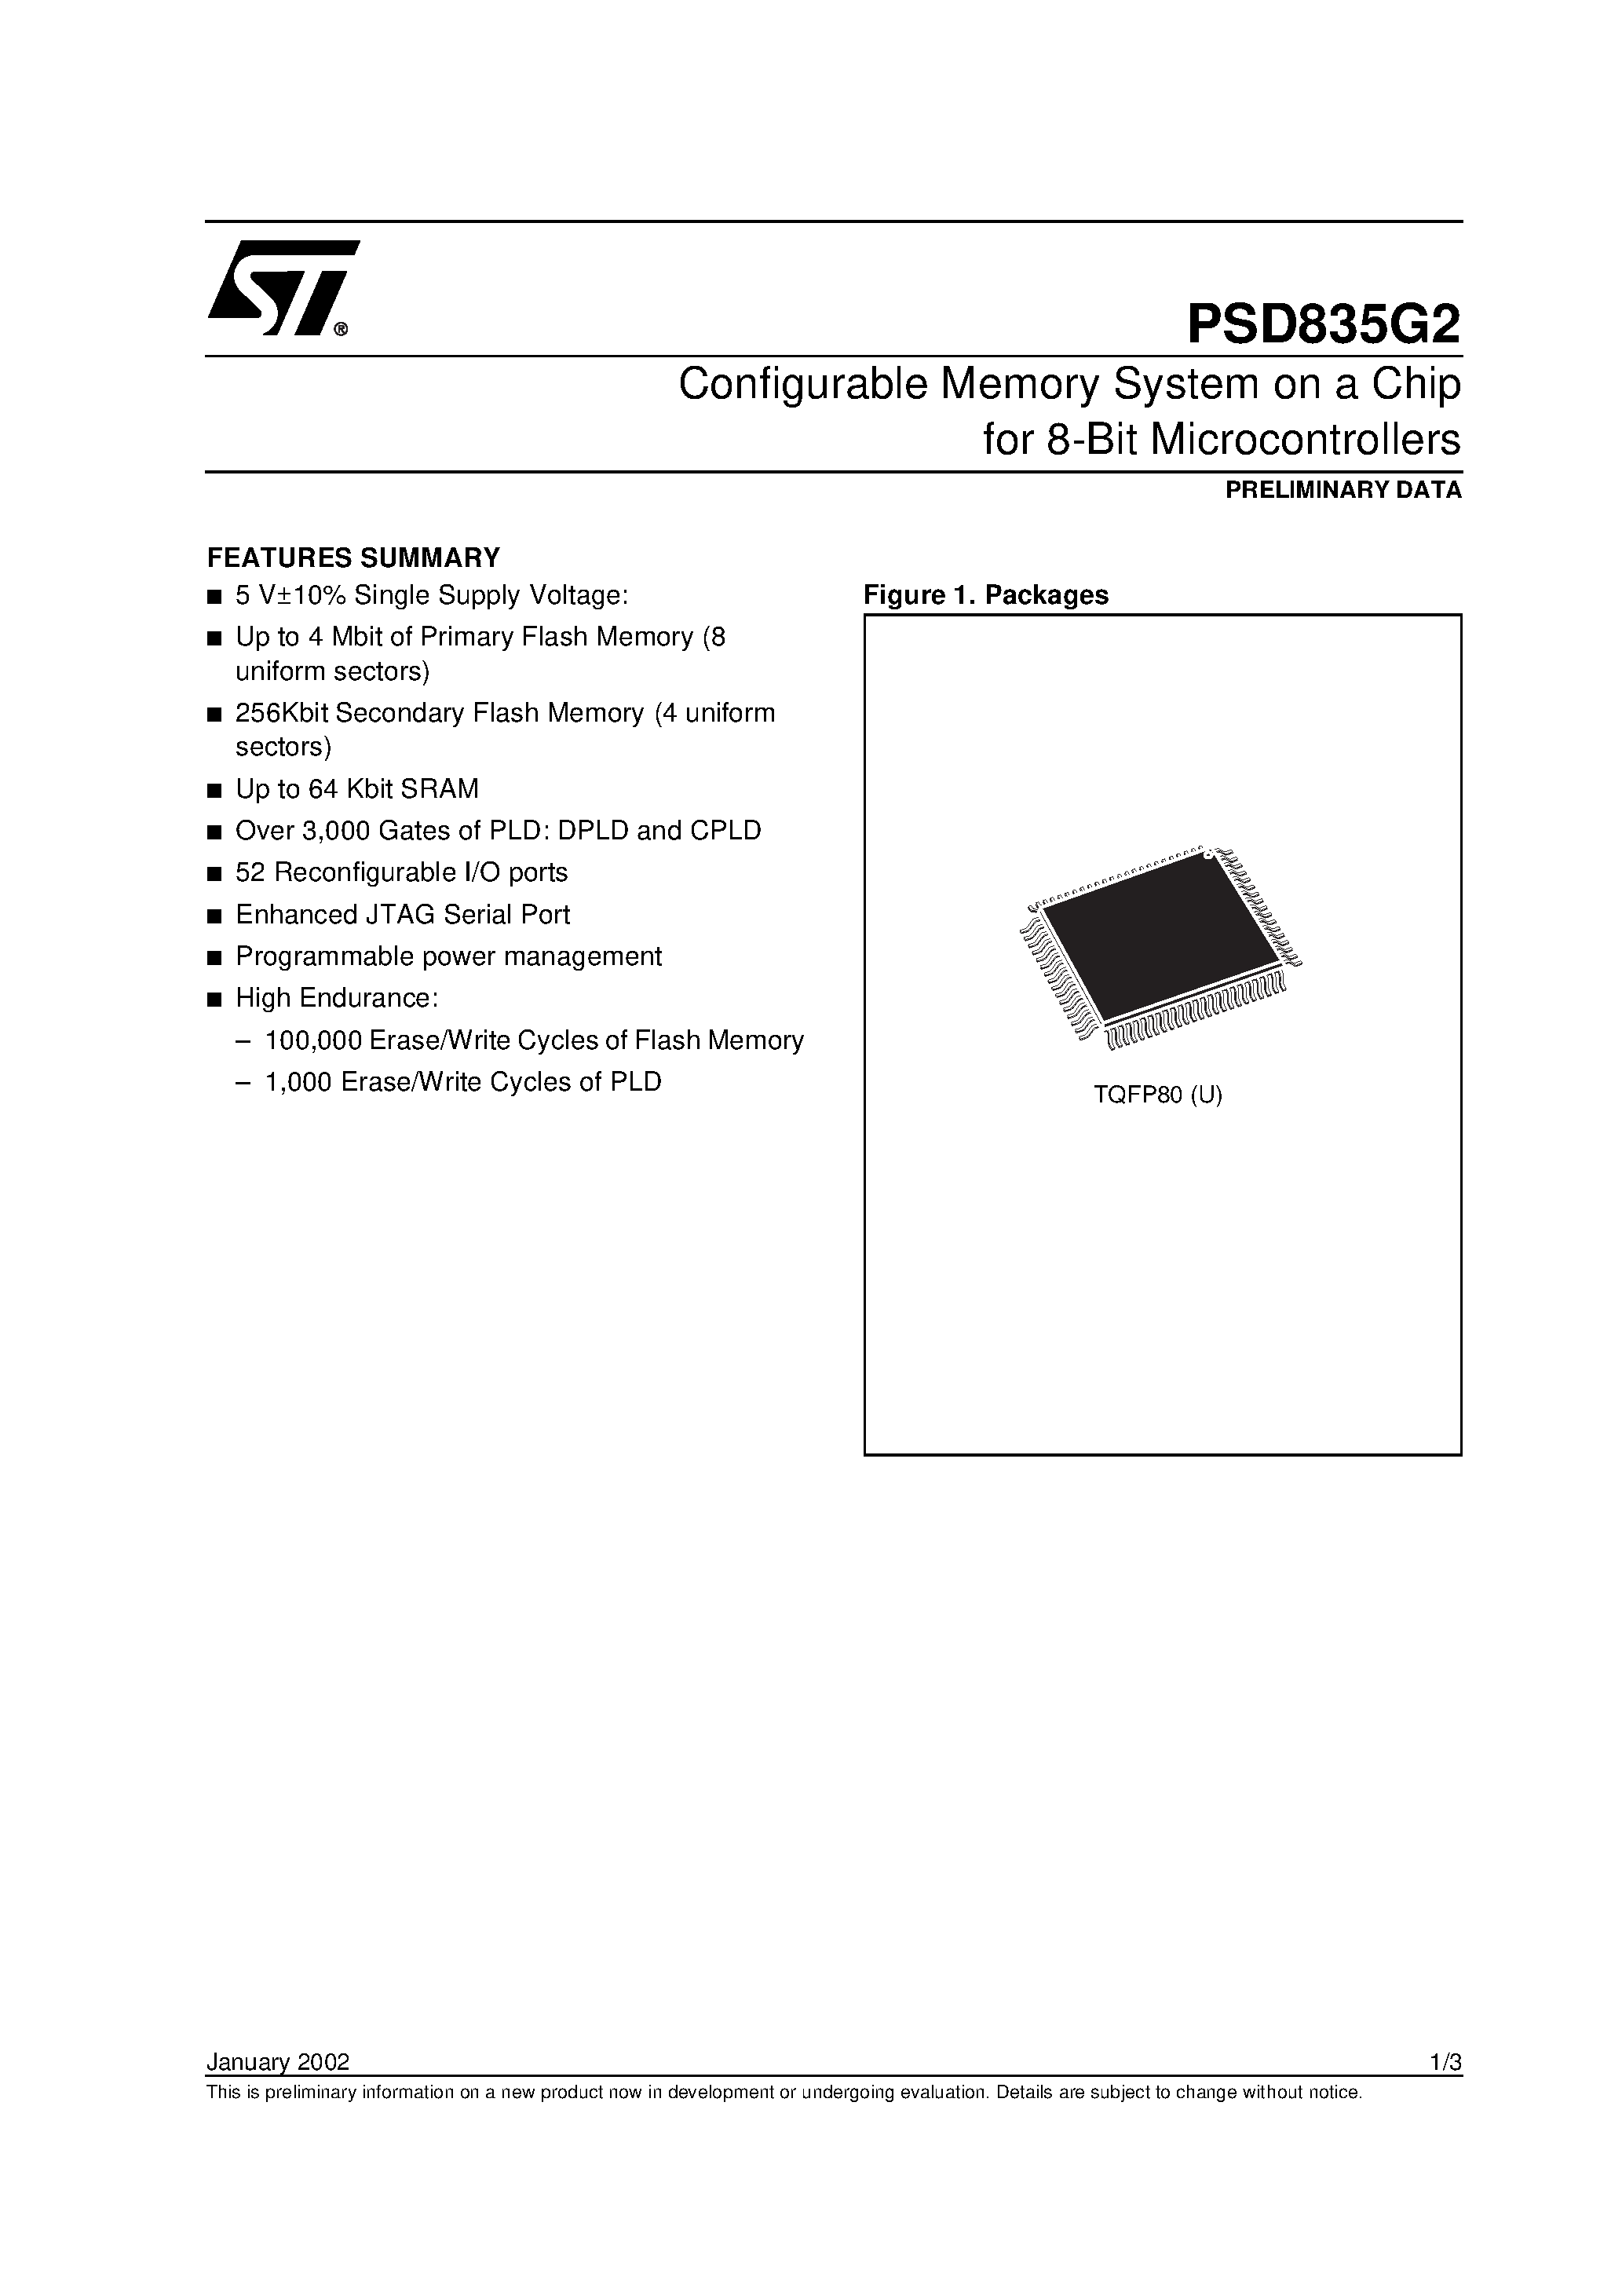 Datasheet PSD835F2-A-20M - Configurable Memory System on a Chip for 8-Bit Microcontrollers page 1